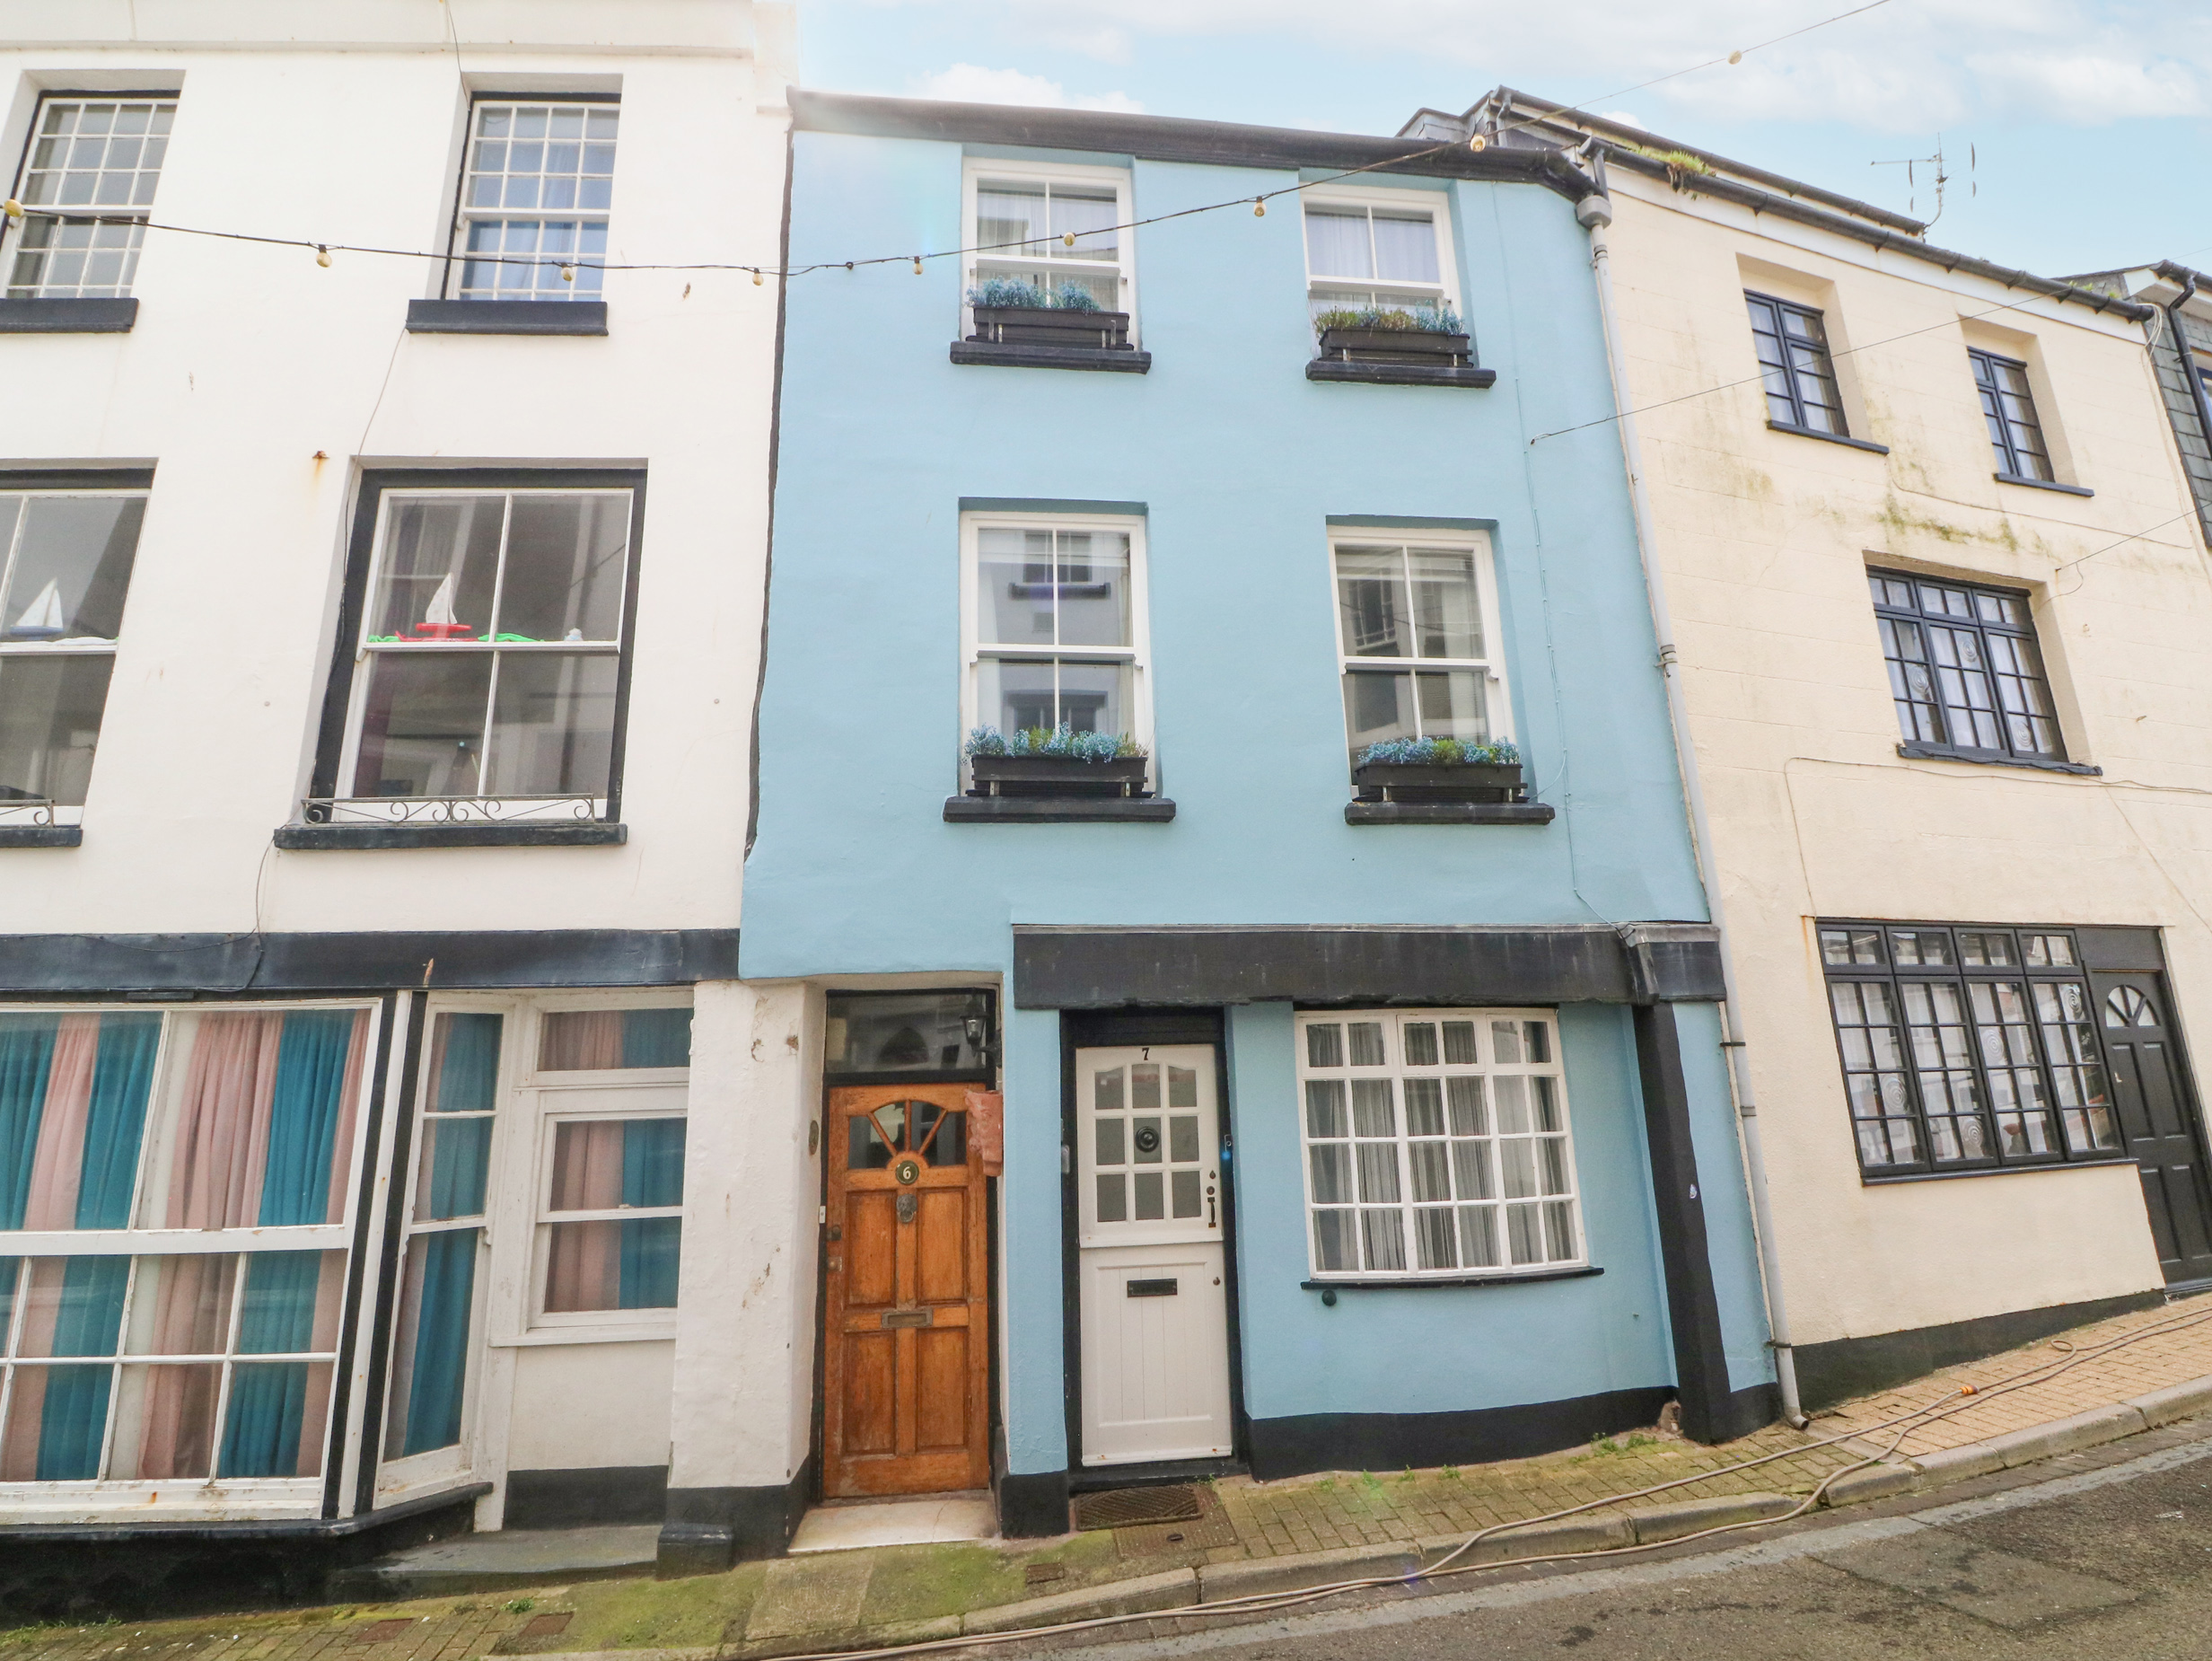 2 bedroom Cottage for rent in Ilfracombe